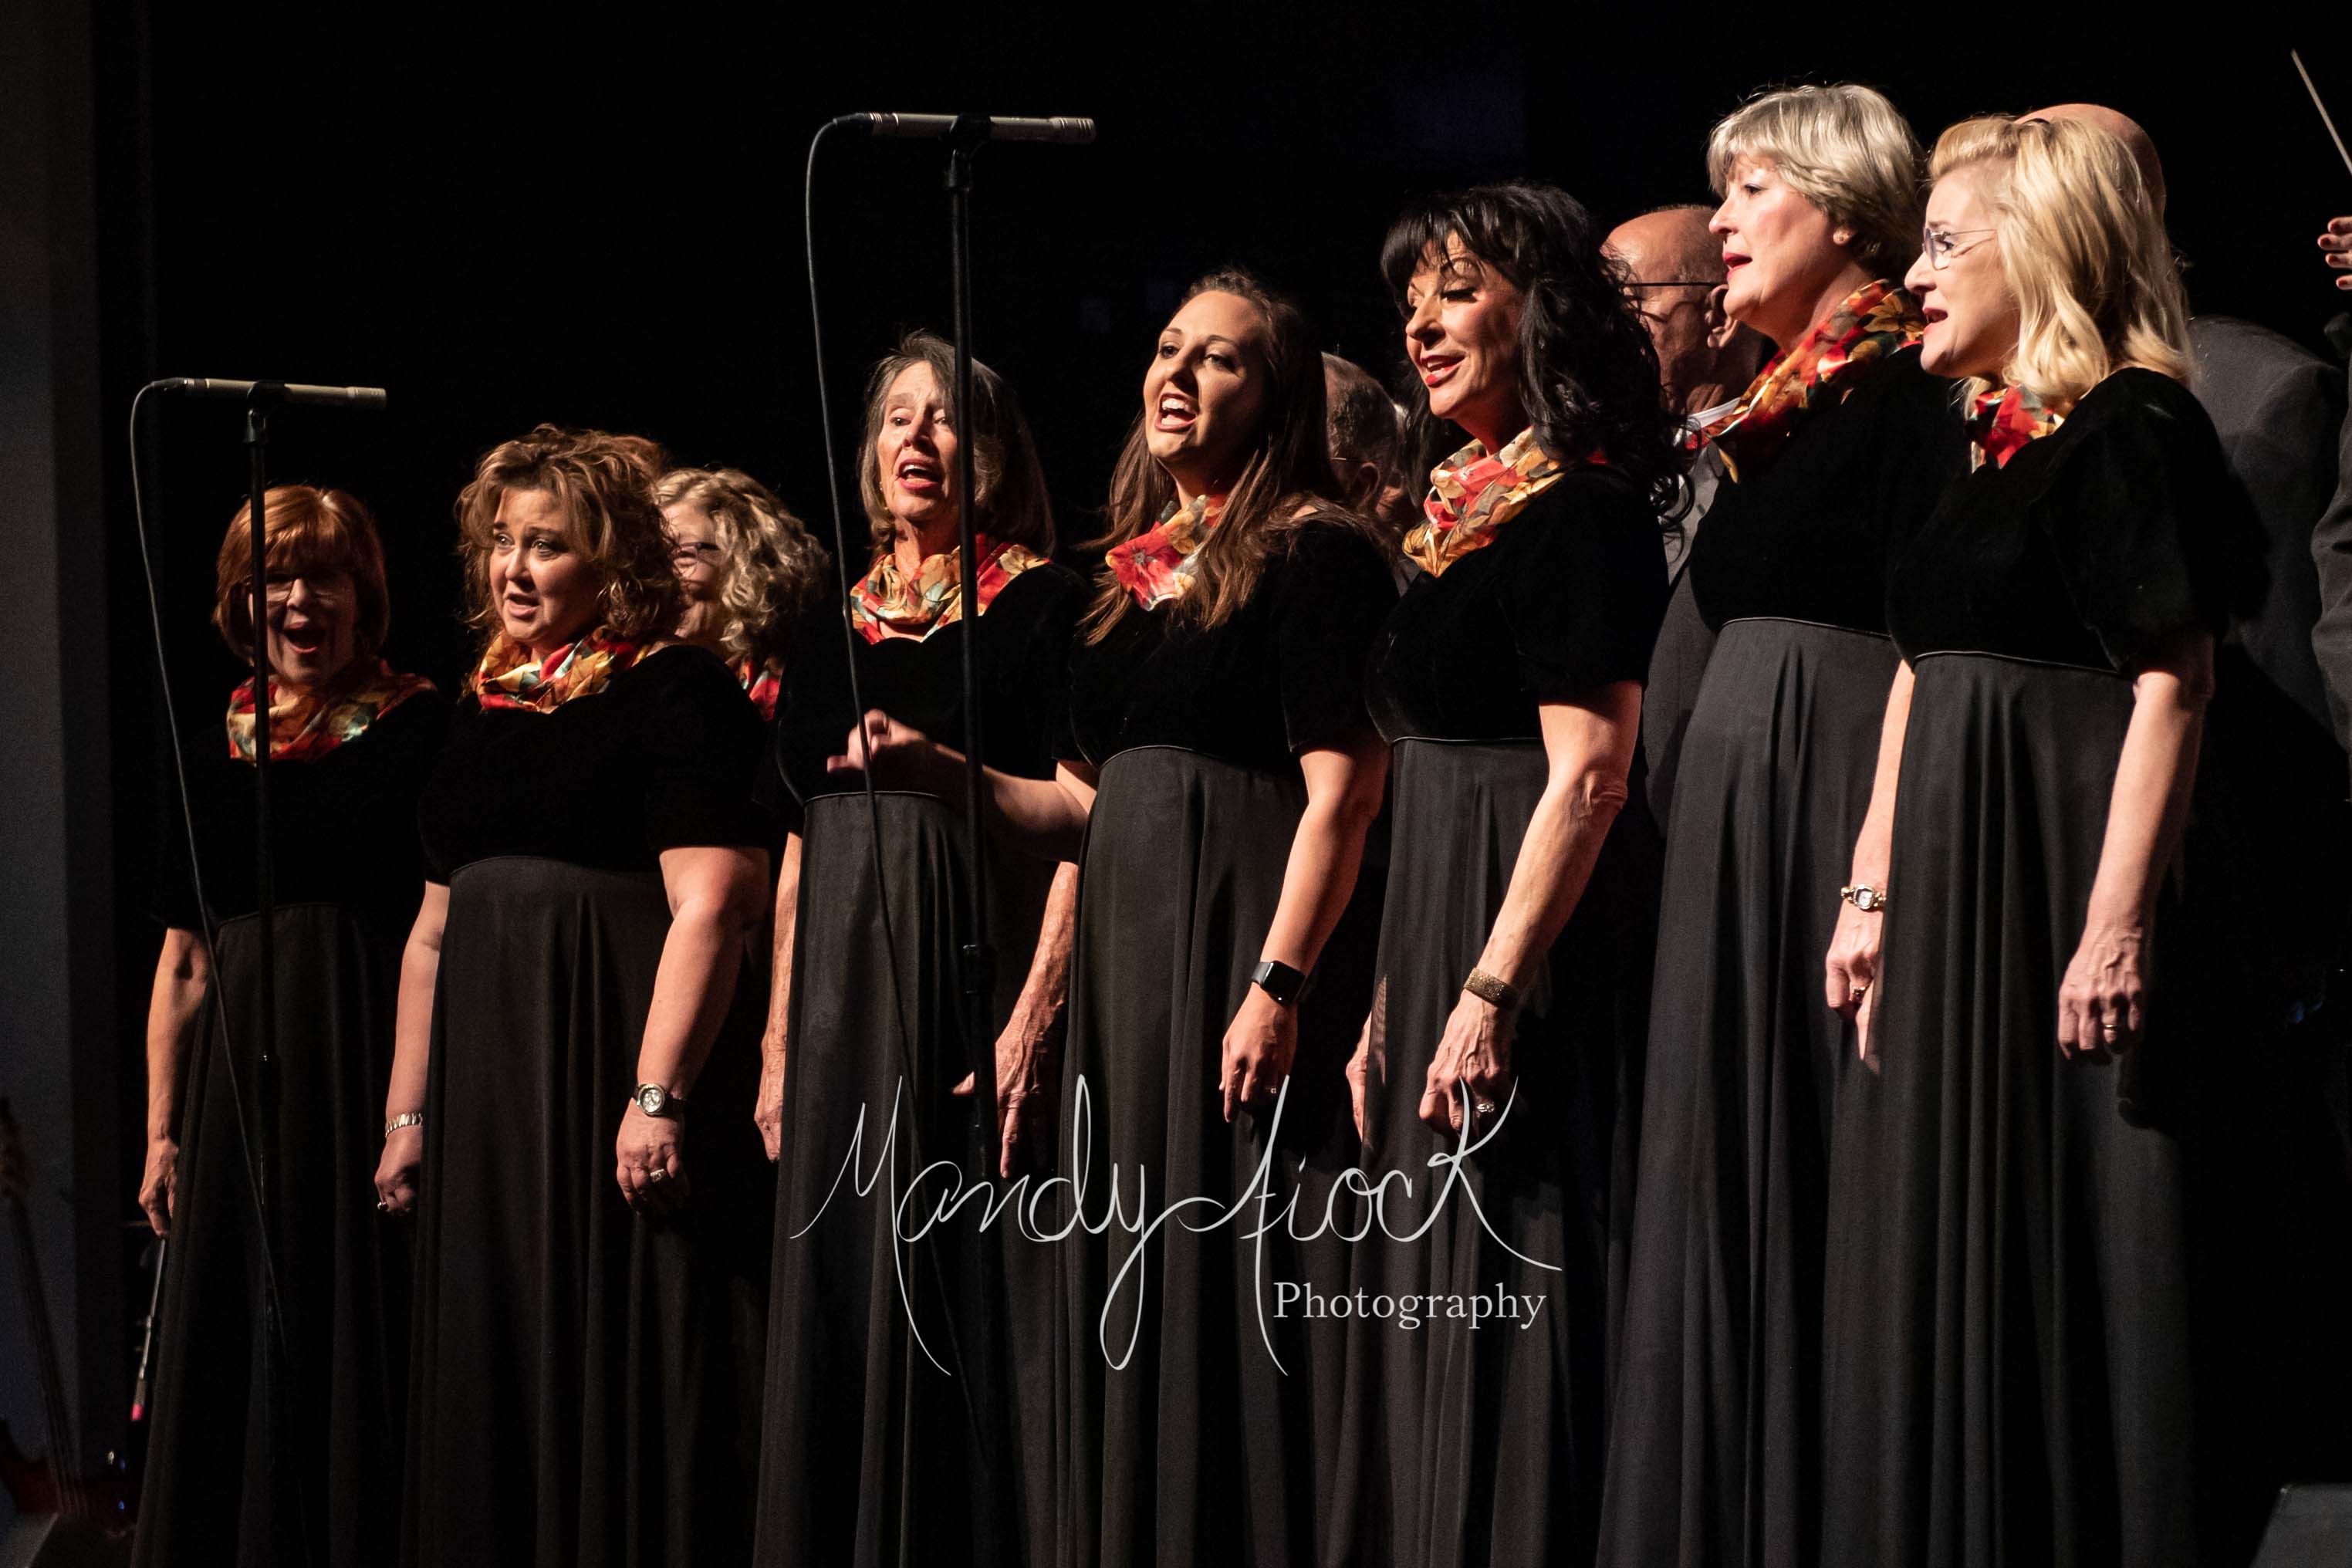 Photos from North East Texas Choral Society’s Christmas concert “Hearts Come Home for Chistmas” by Mandy Fiock Photography!